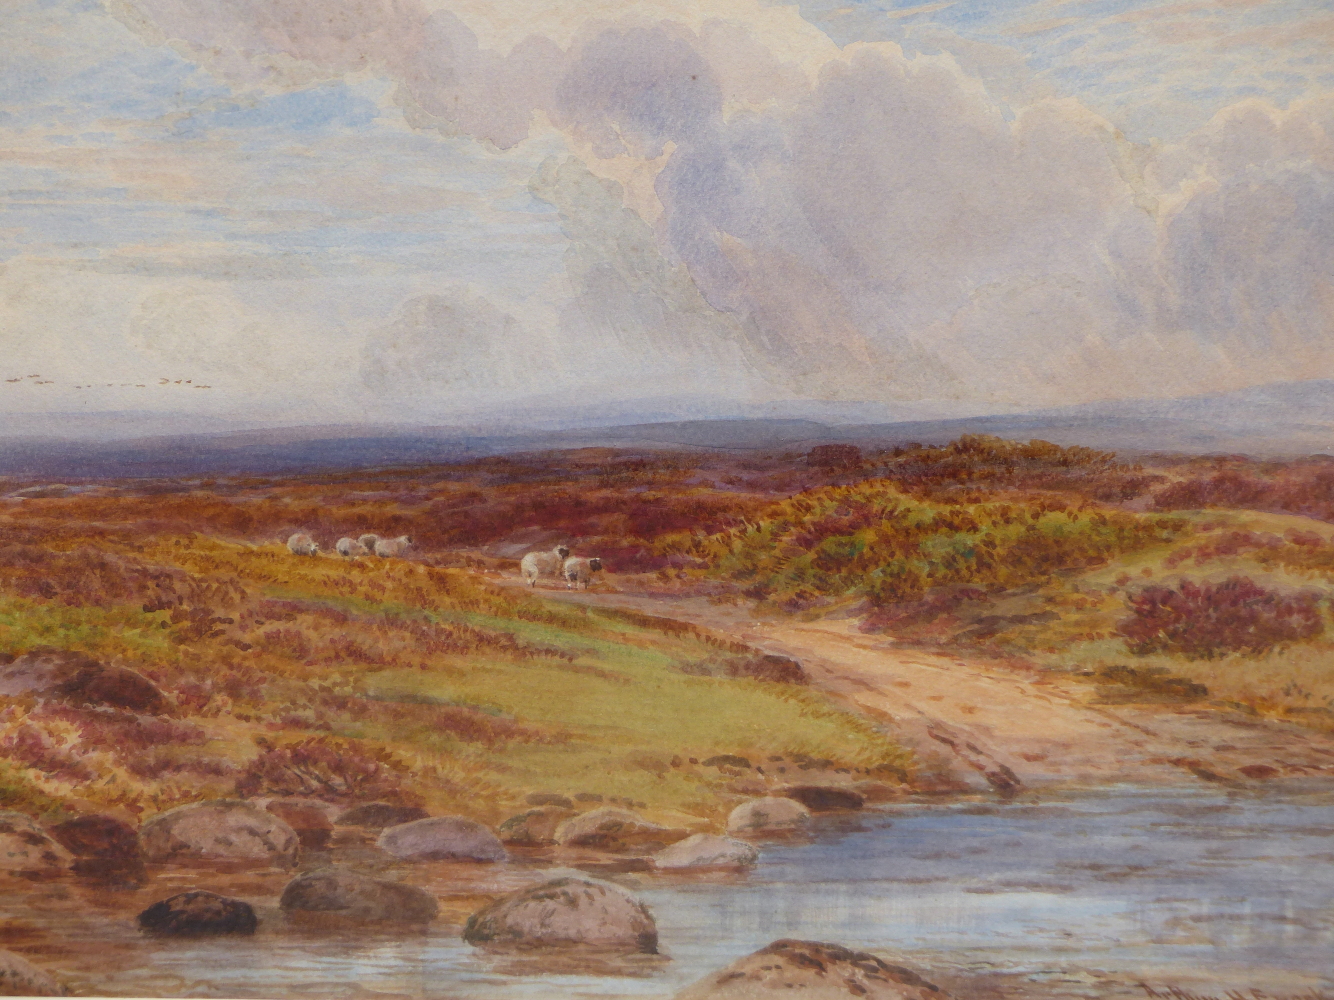 ARTHUR HENRY ENOCK (1828-1917), EXTENSIVE MOORLAND LANDSCAPE WITH SHEEP, SIGNED, WATERCOLOUR, 51 x